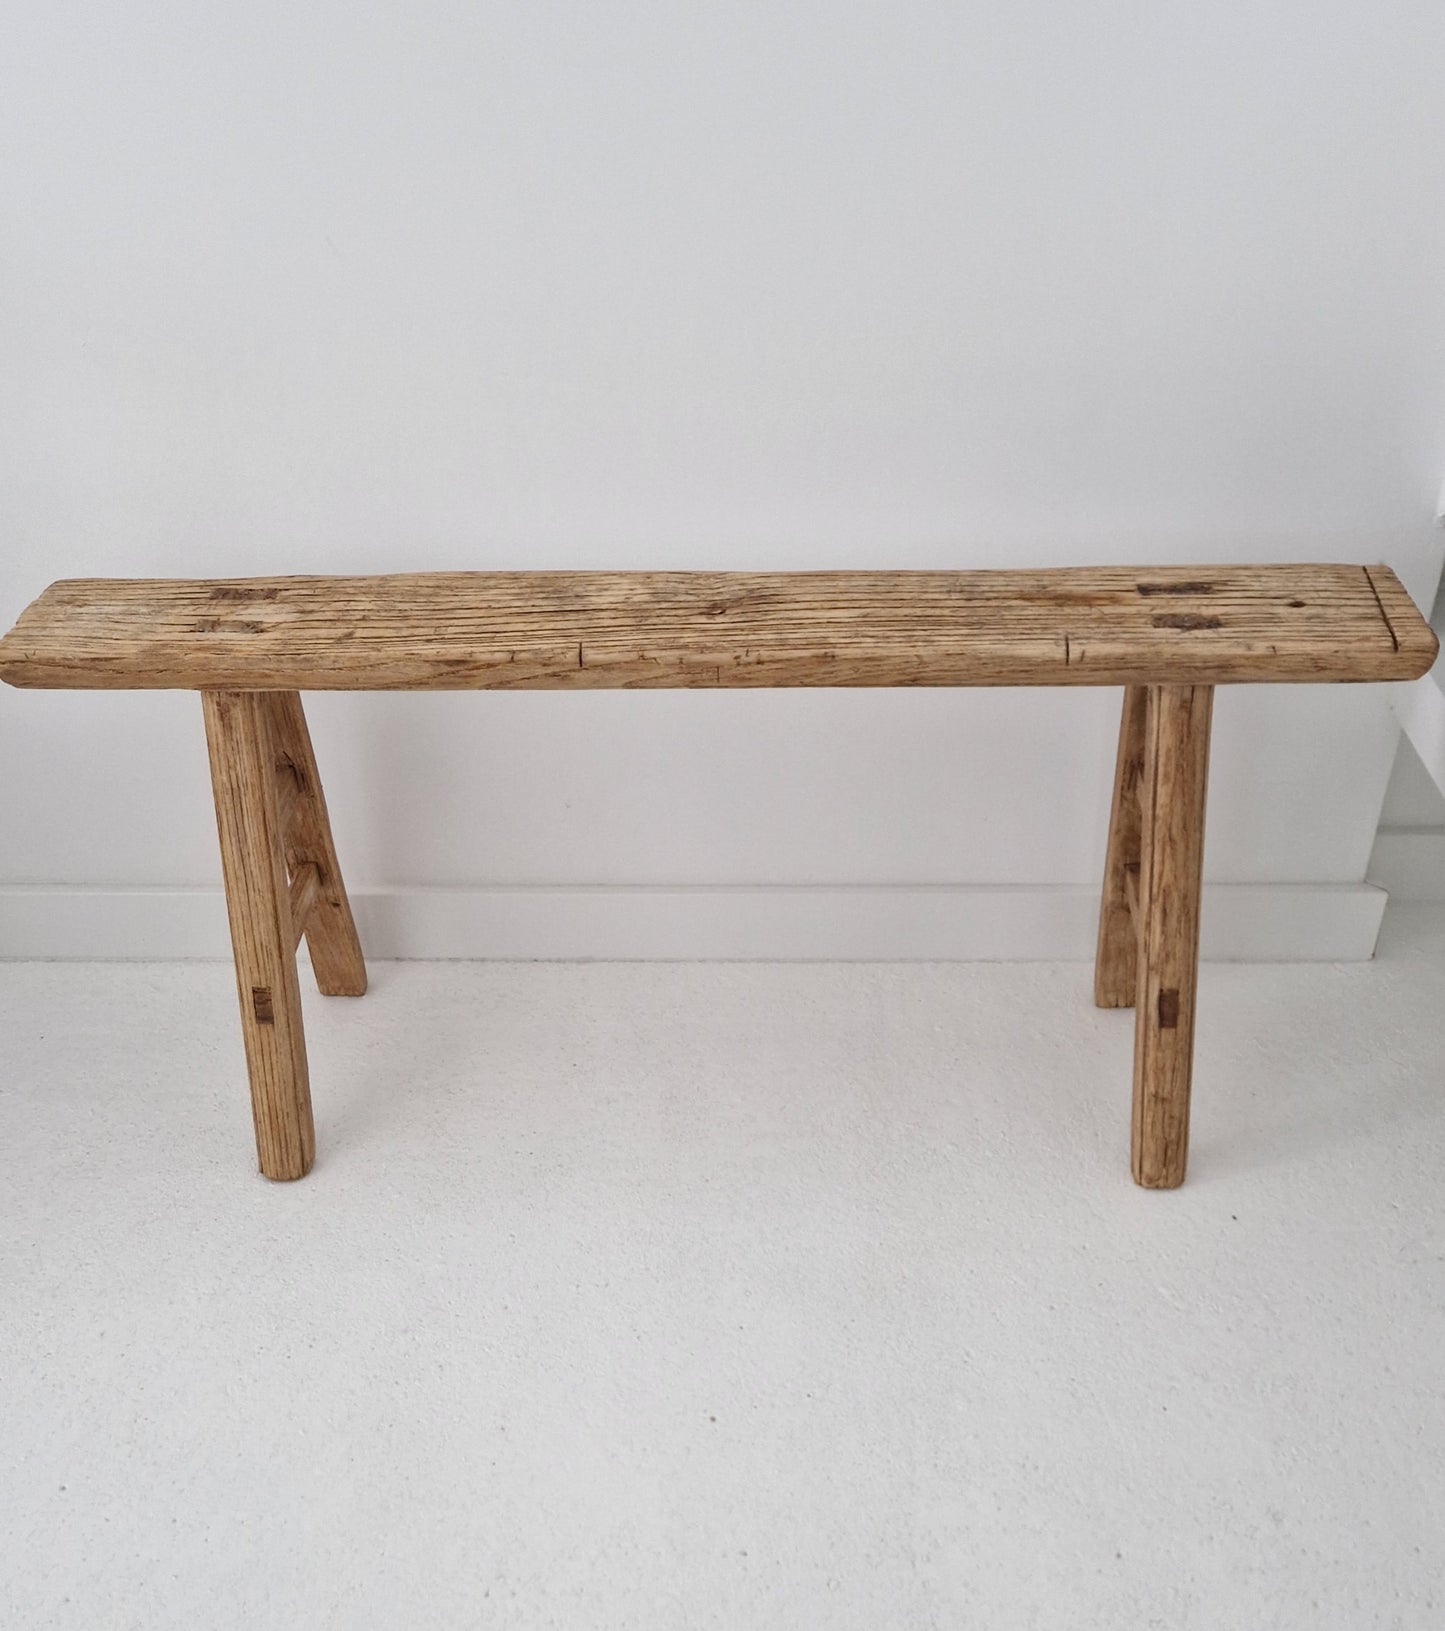 Old wooden bench #5 (118,5cm)